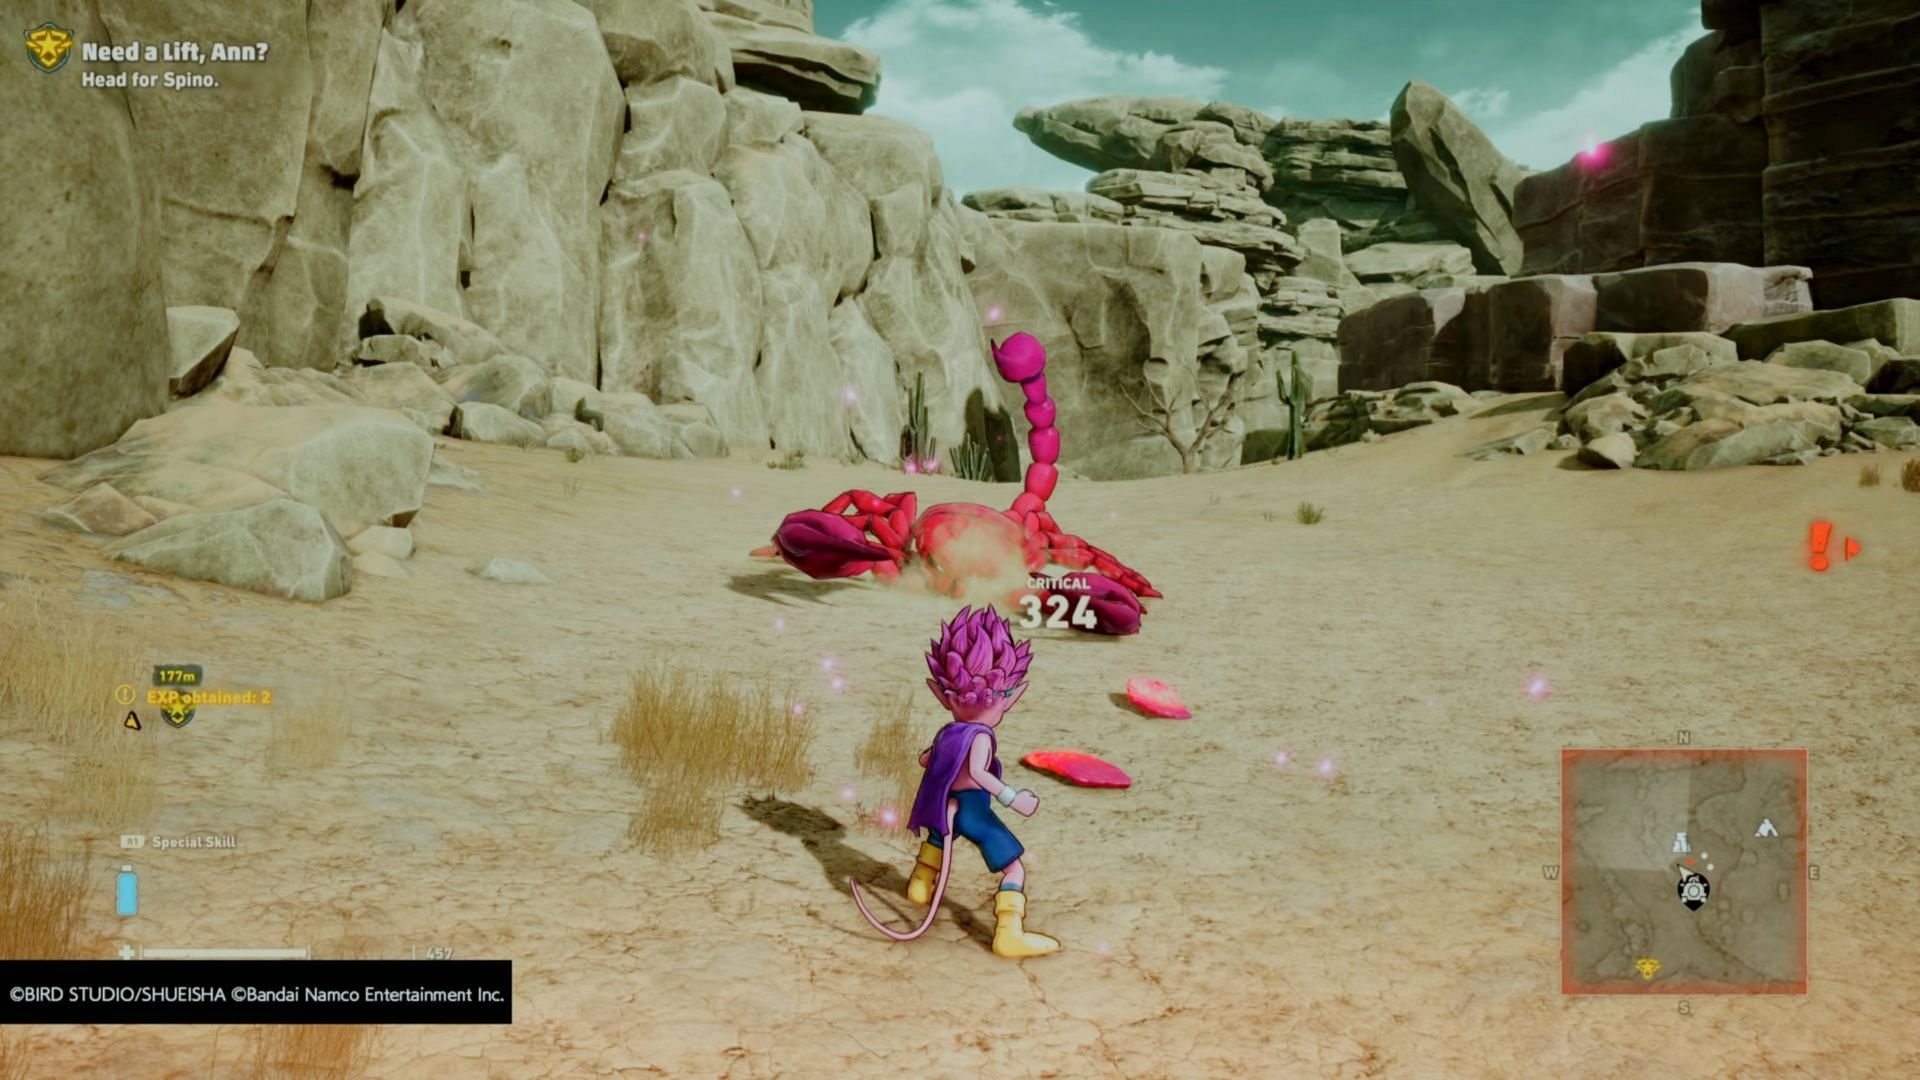 The monsters can get pretty big out there in the desert (Image via Bandai Namco)